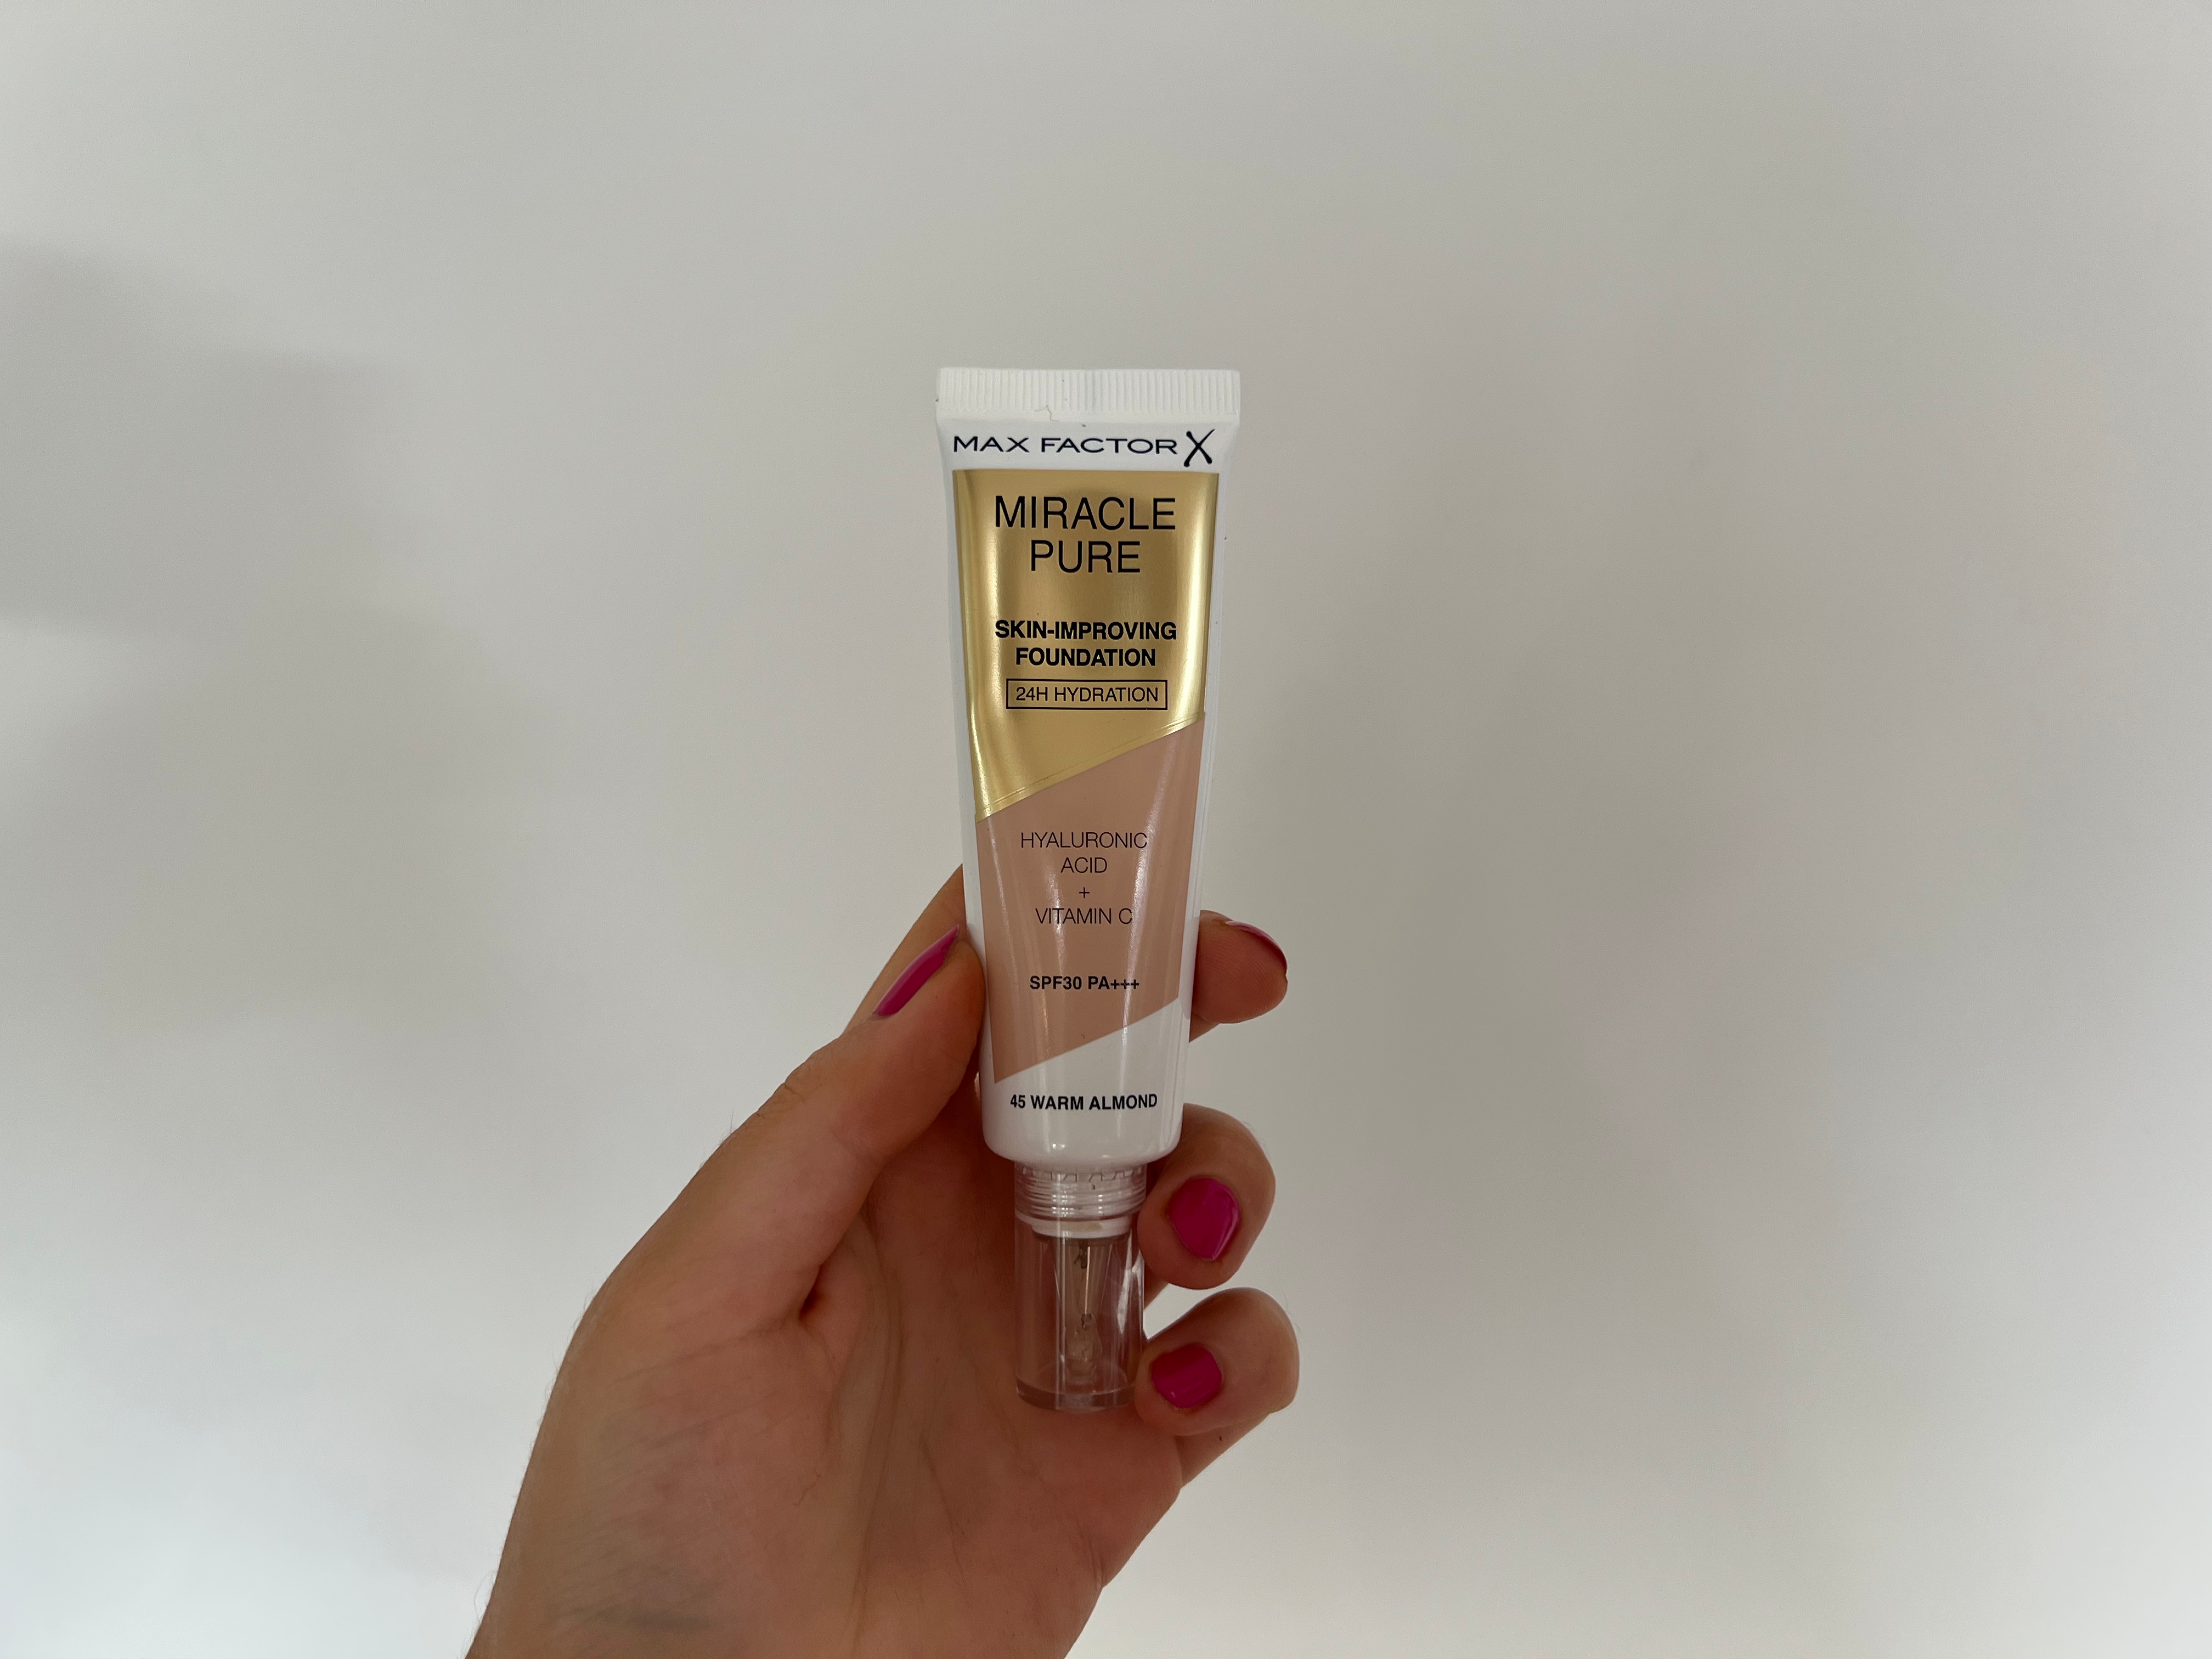 Max Factor miracle pure skin improving foundation review